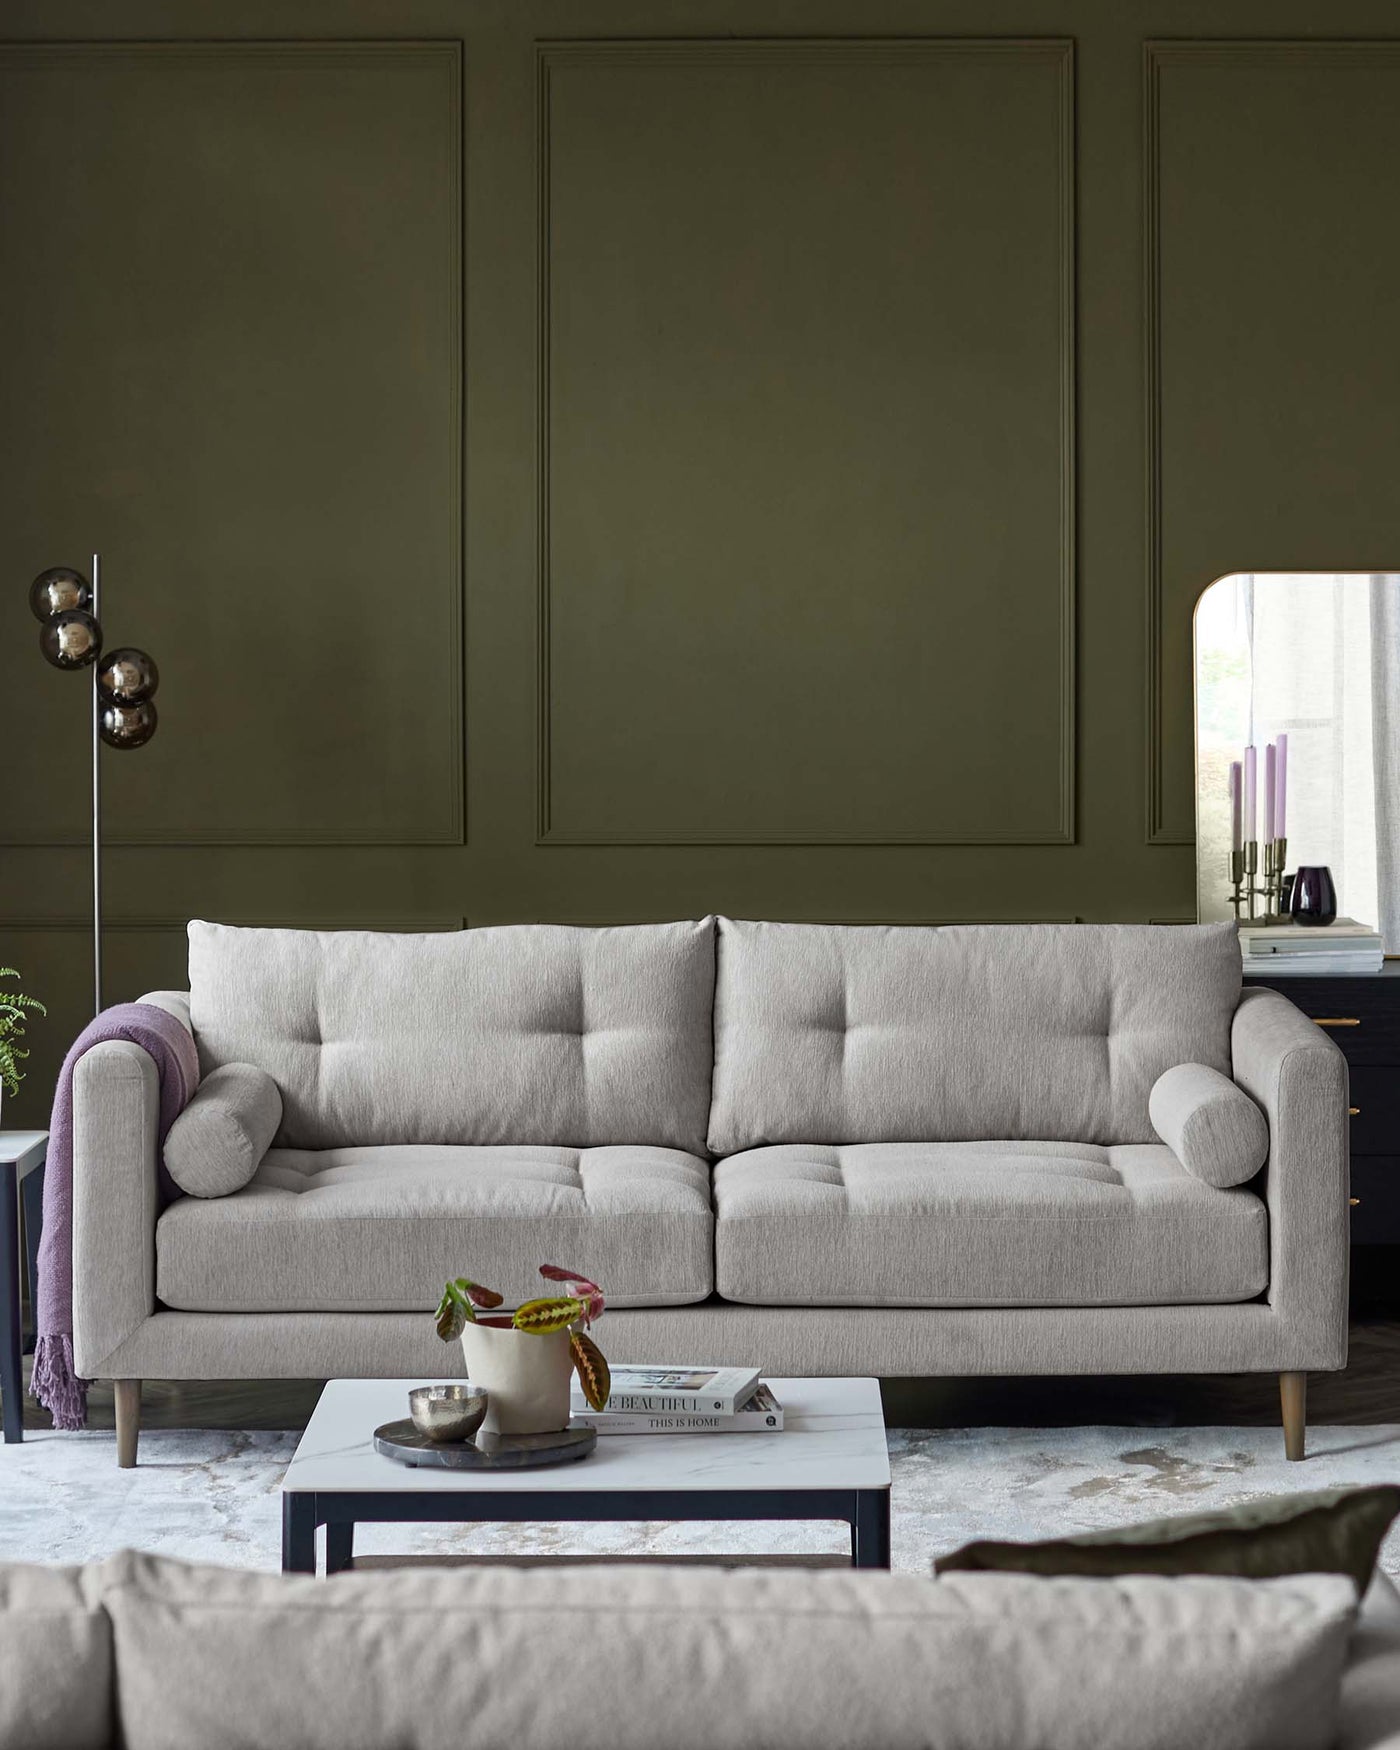 Contemporary three-seater sofa with a textured light grey fabric upholstery and plush cushioning, featuring padded armrests, a low-profile back, and supported by minimalist wooden legs. In front of it is a sleek, rectangular coffee table in matte grey, holding decor items and books, all sitting atop a subtle, patterned area rug.